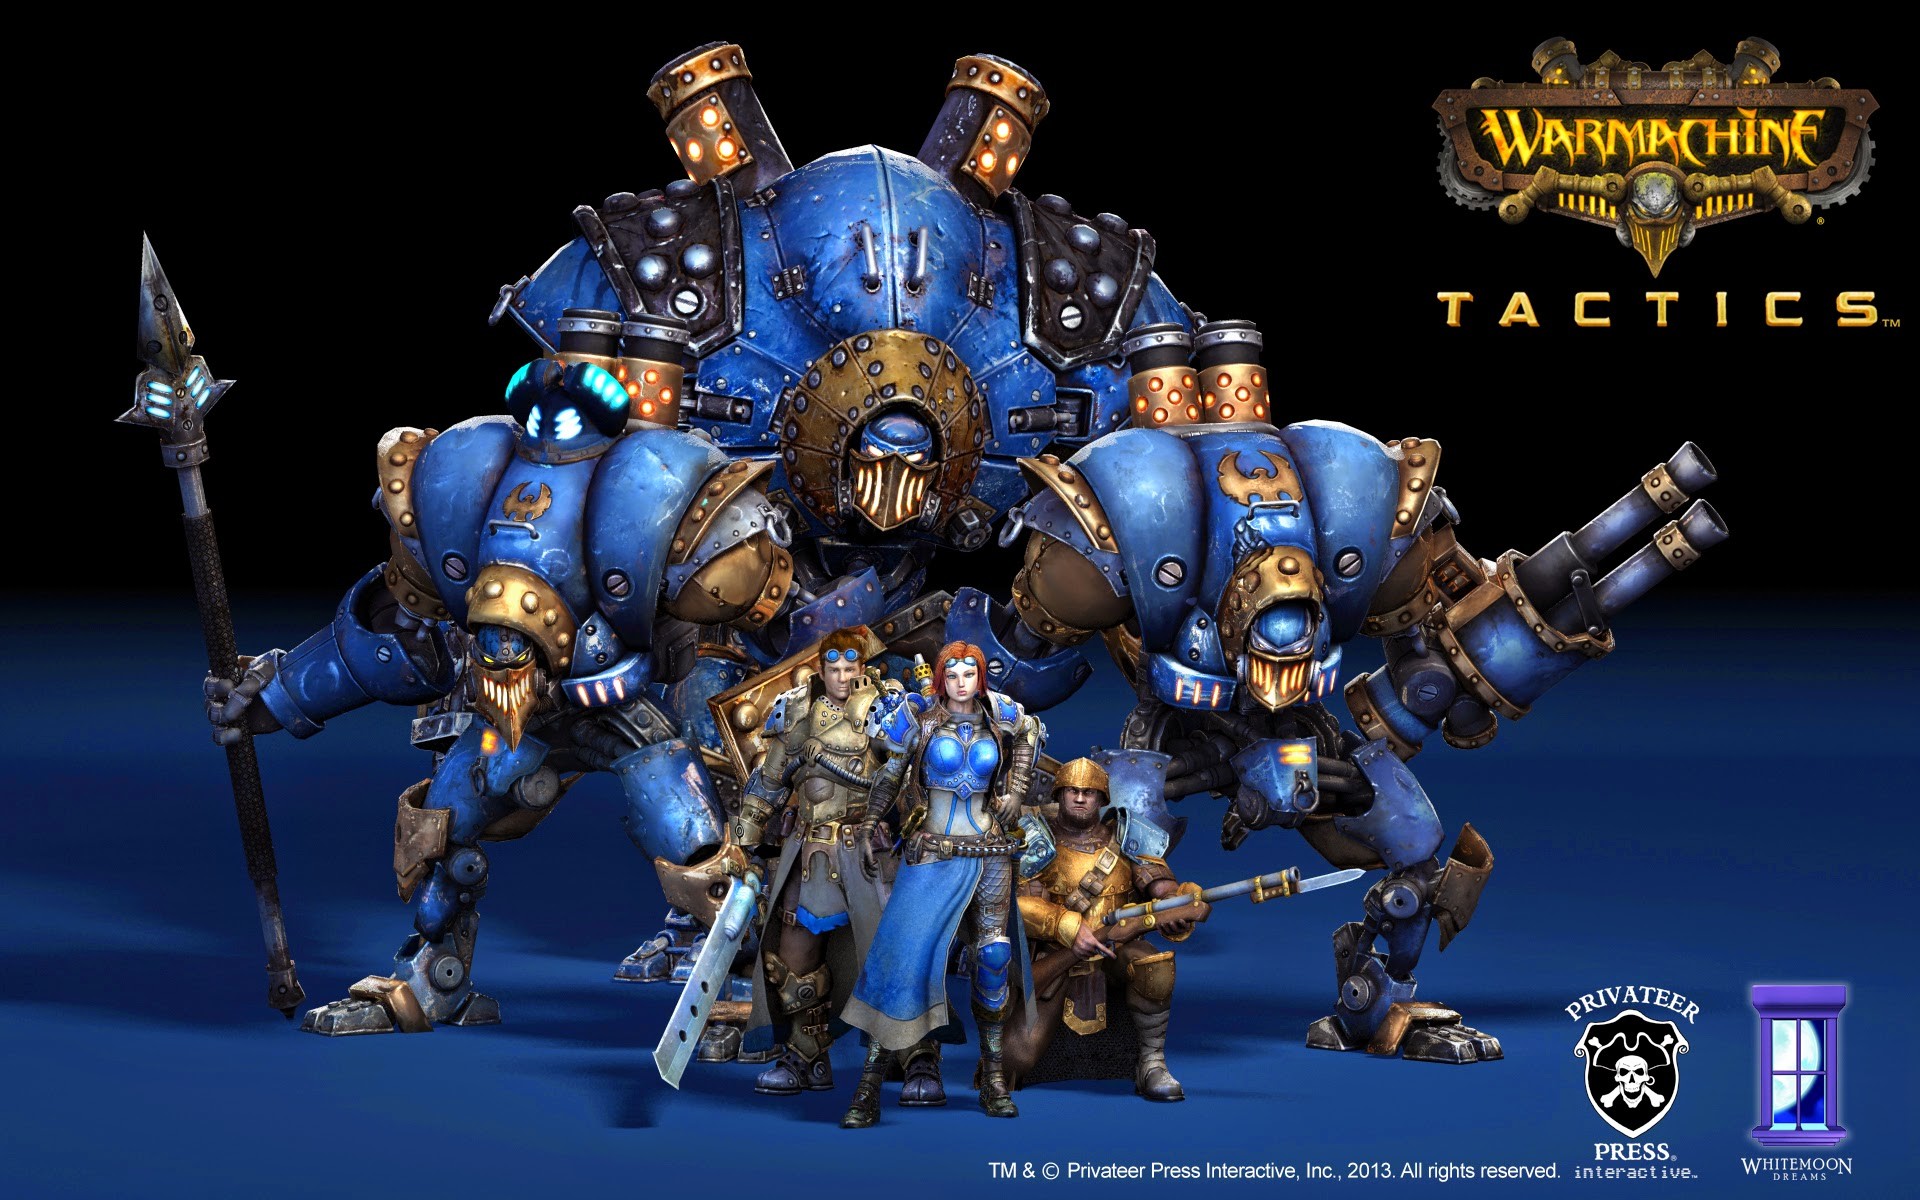 1920x1200 Warmachine Tactics Wallpapers My favorite pic (where the Cygnar is standing  .